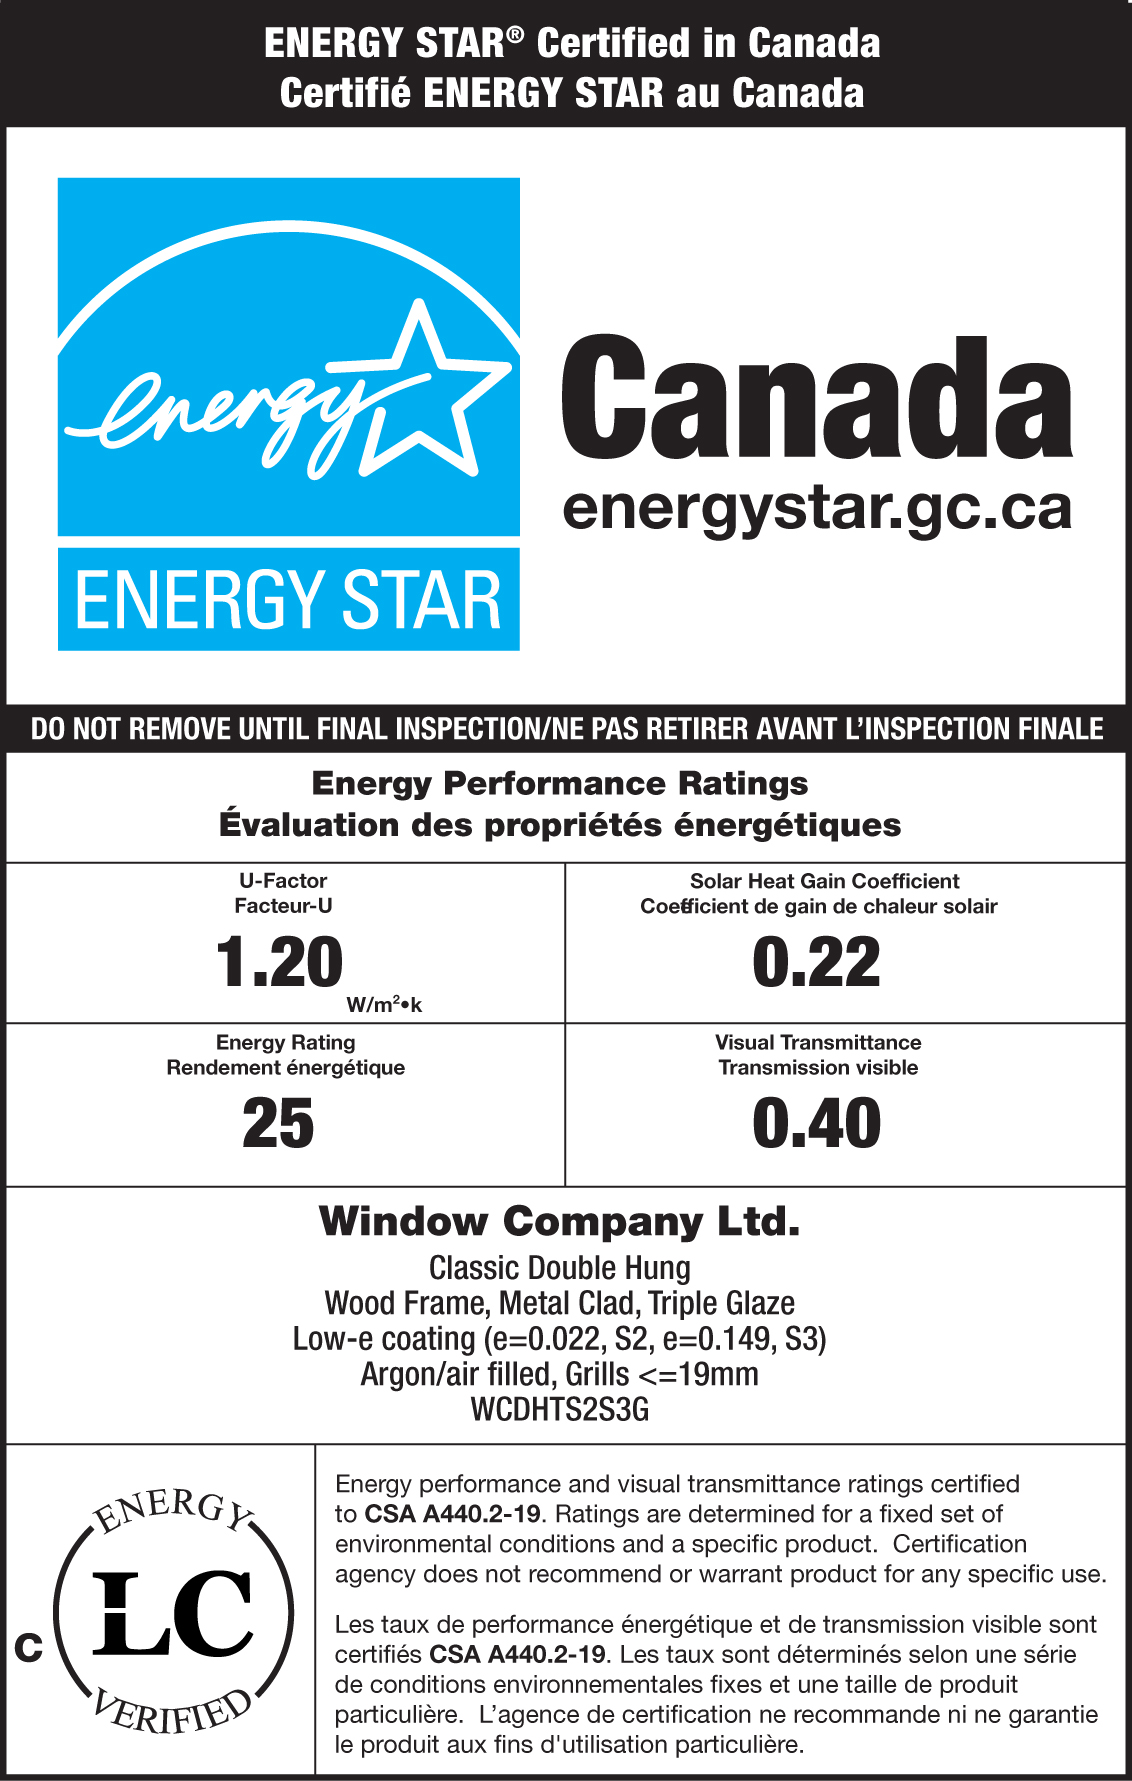 Sample ENERGY STAR label with the energy performance label and certification mark (LabTesT)